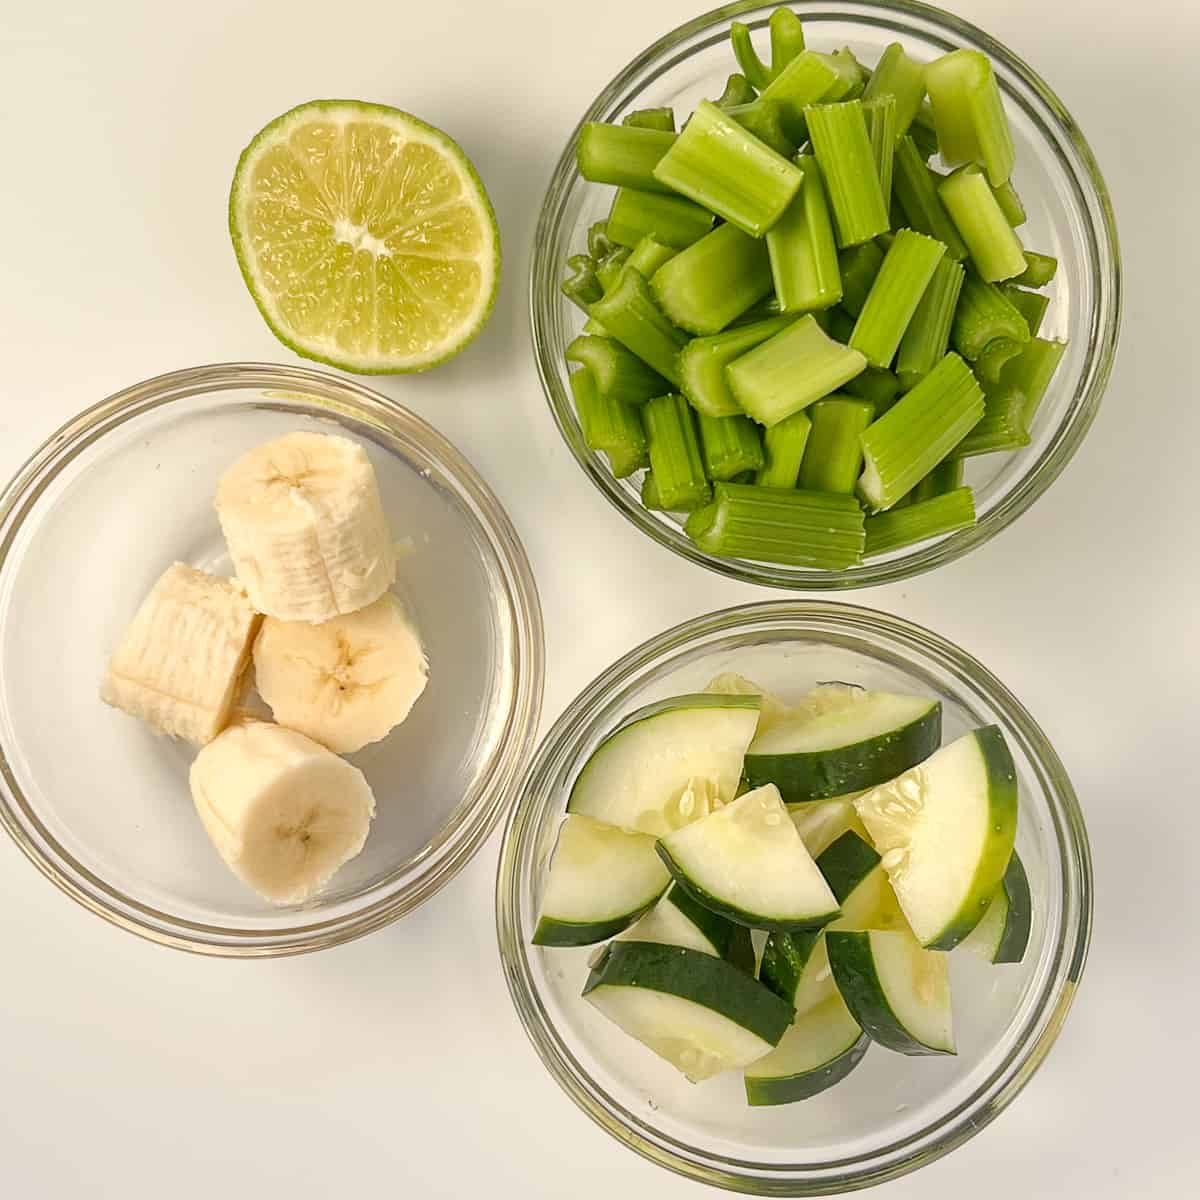 top view of some of the ingredients for smoothie: celery, cucumber, banana, lime